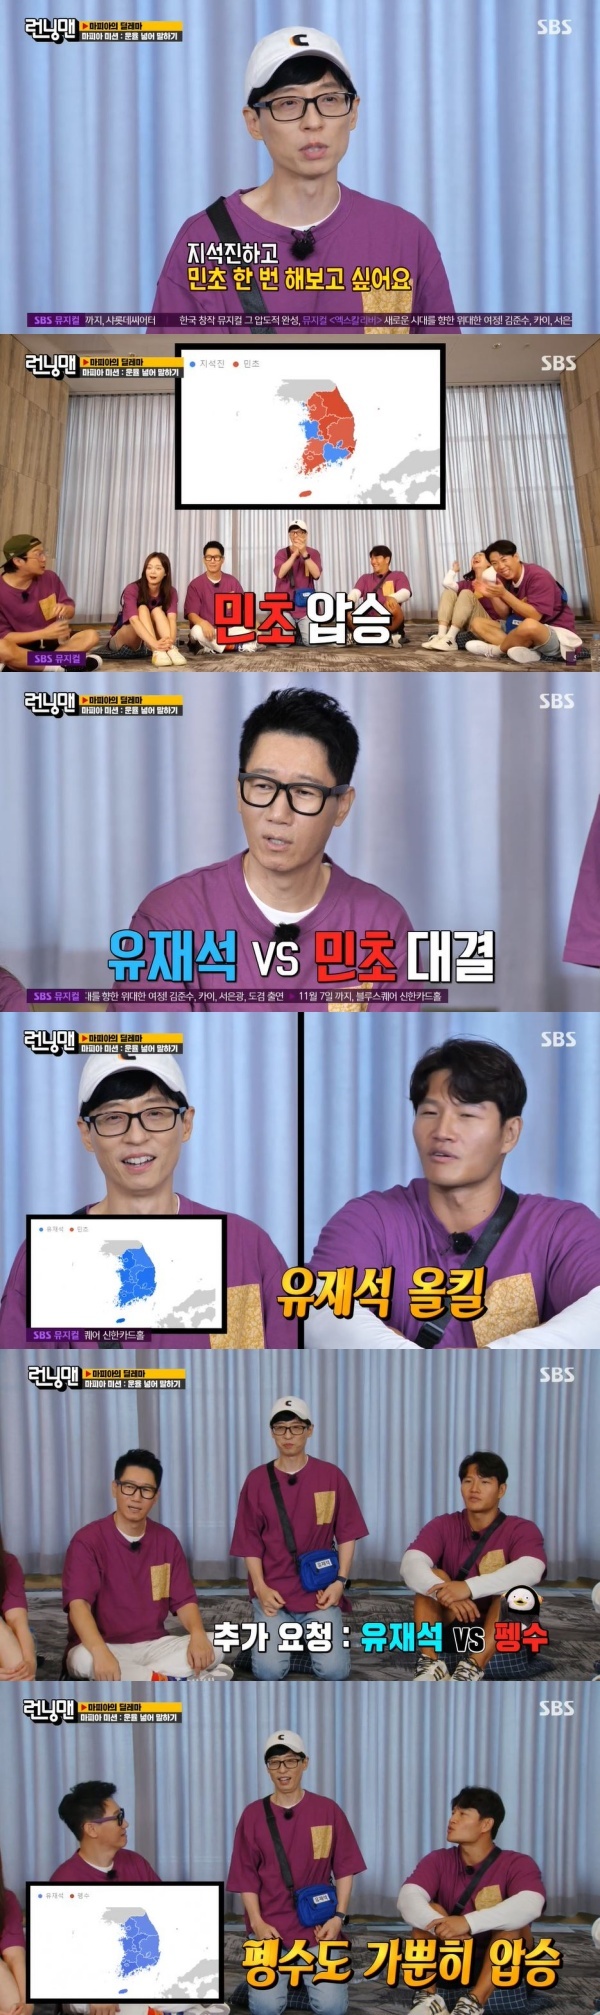 On the SBS entertainment program Running Man, which aired on the 12th, the members participating in the prisoners dilemma race were portrayed.After completing the search volume Battle, Yoo Jae-Suk suggested Ji Suk-jin and once Mincho (I want to try the search volume Battle).Ji Suk-jin, who was defeated by Mincho, called Yoo Jae-Suk and Mincho Battle (proposed); Yoo Jae-Suk won in all areas.Ji Suk-jin suggested that Yoo Jae-Suk, Pengsoo also (do a search volume Battle).Yoo Jae-Suk also overwhelmed Pengsoo, proving its extraordinary popularity.Meanwhile, Running Man is an entertainment program that Korean stars play games and missions together and give laughter. It broadcasts every Sunday at 5 p.m.Photo SBS broadcast screen capture